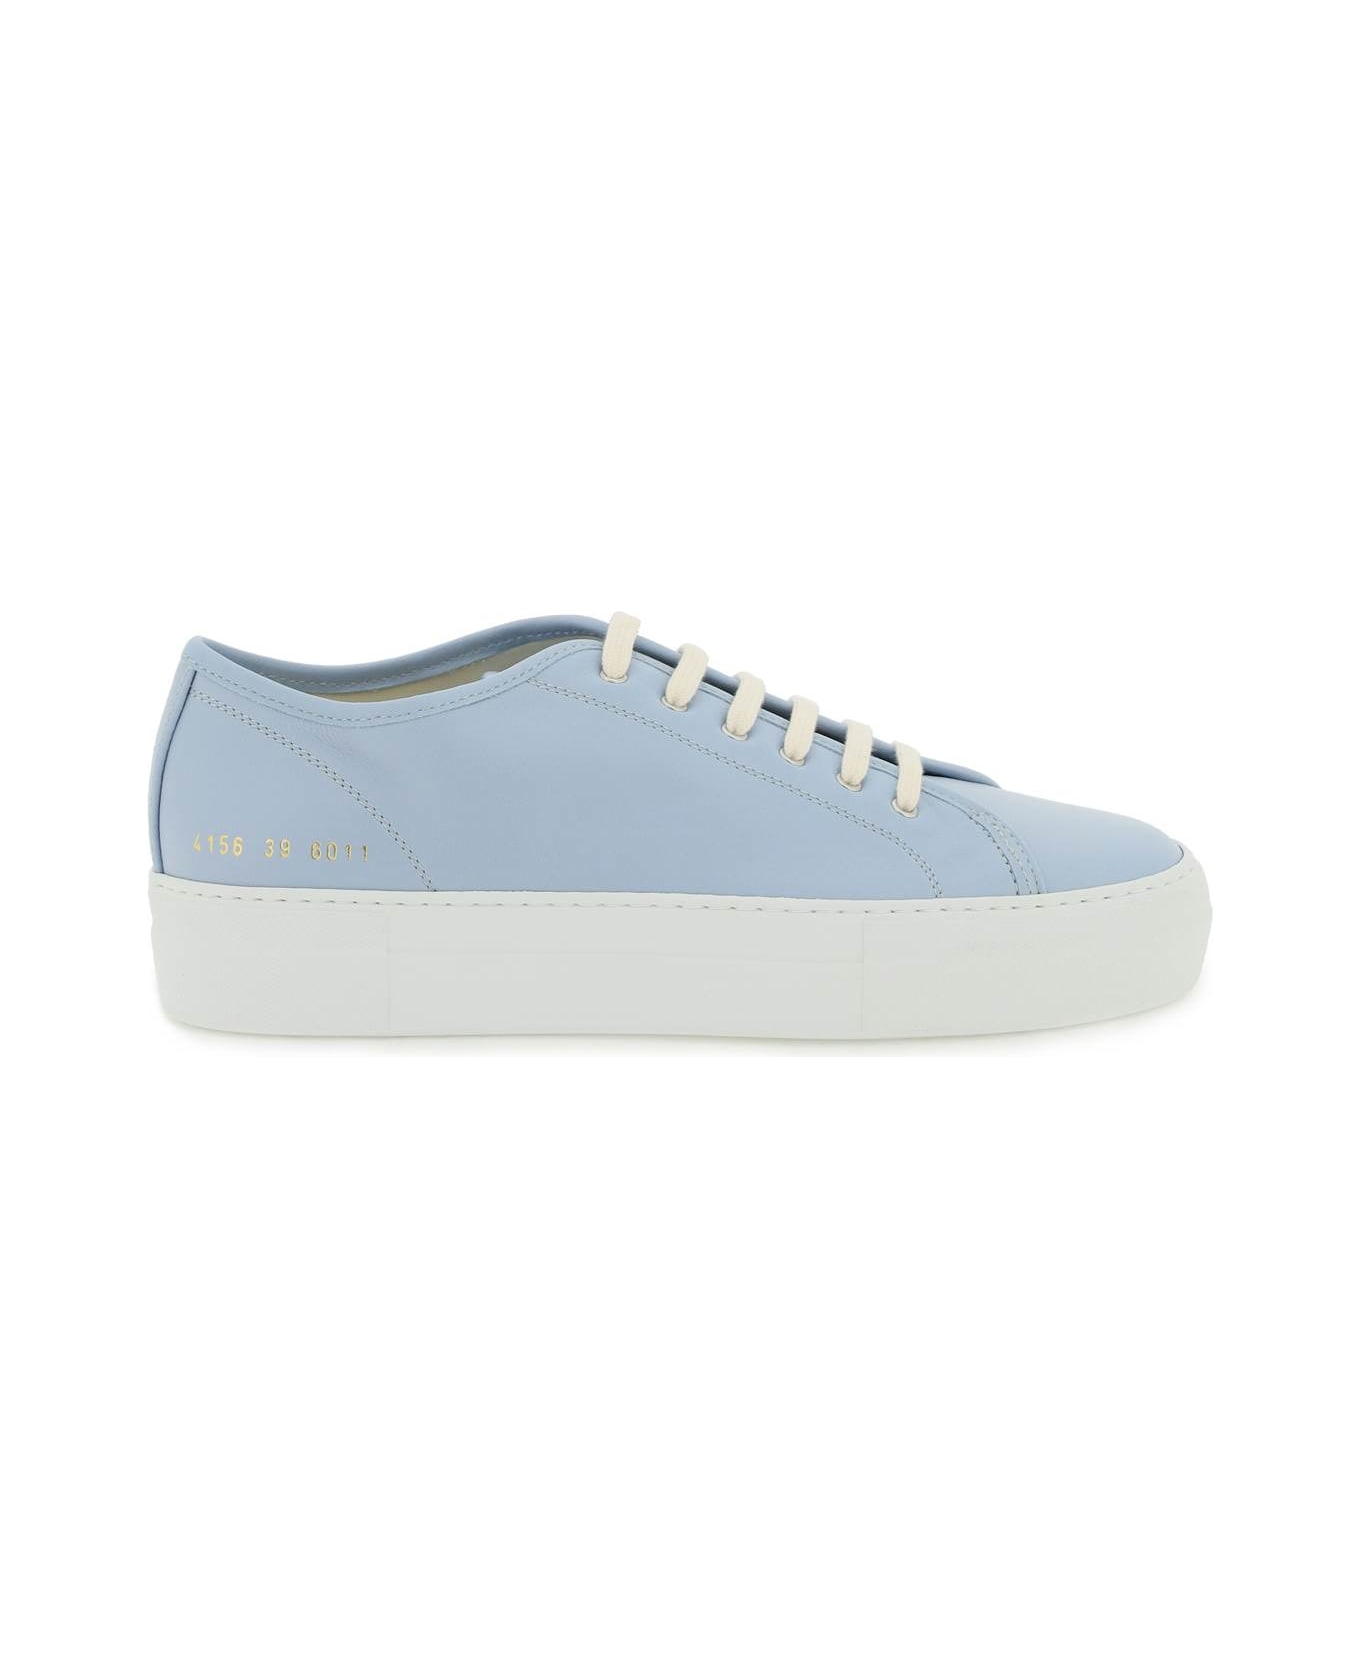 Common Projects Leather Tournament Low Super Sneakers - BABY BLUE (Light blue) スニーカー